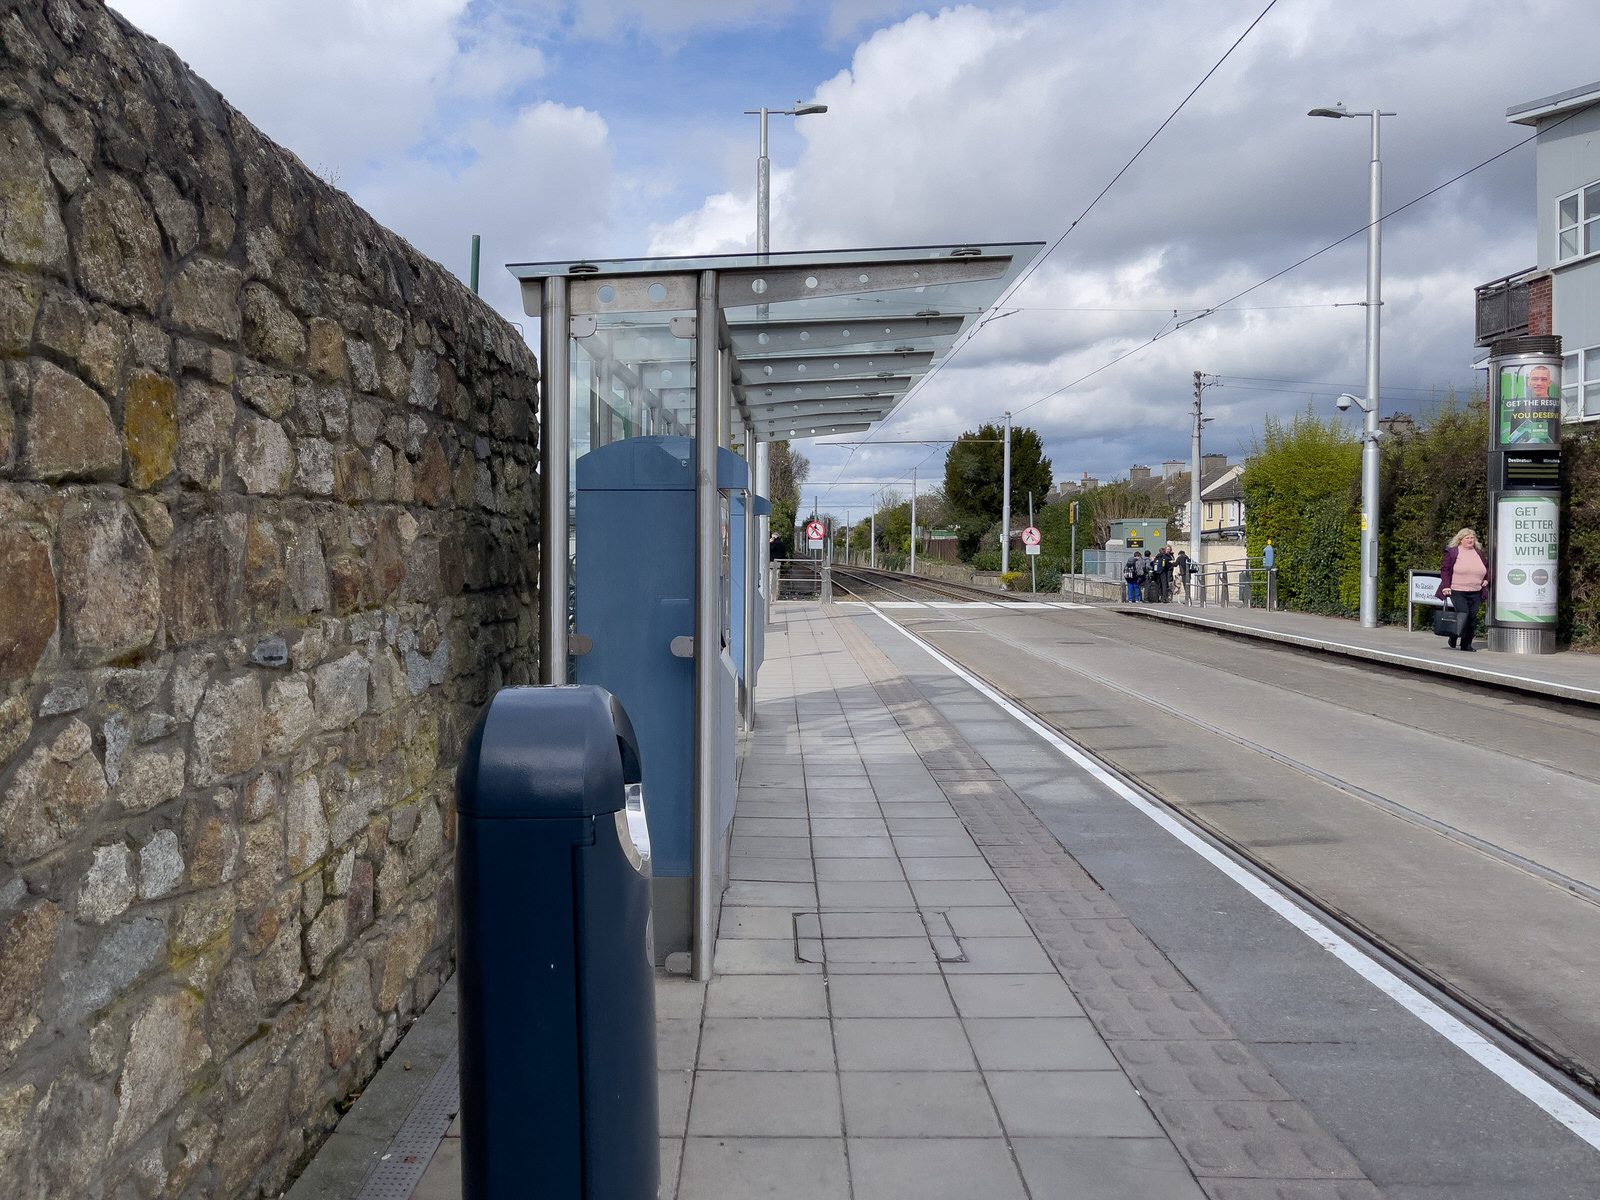 THE LUAS TRAM STOP AT WINDY ARBOUR AND THE IMMEDIATE AREA 032